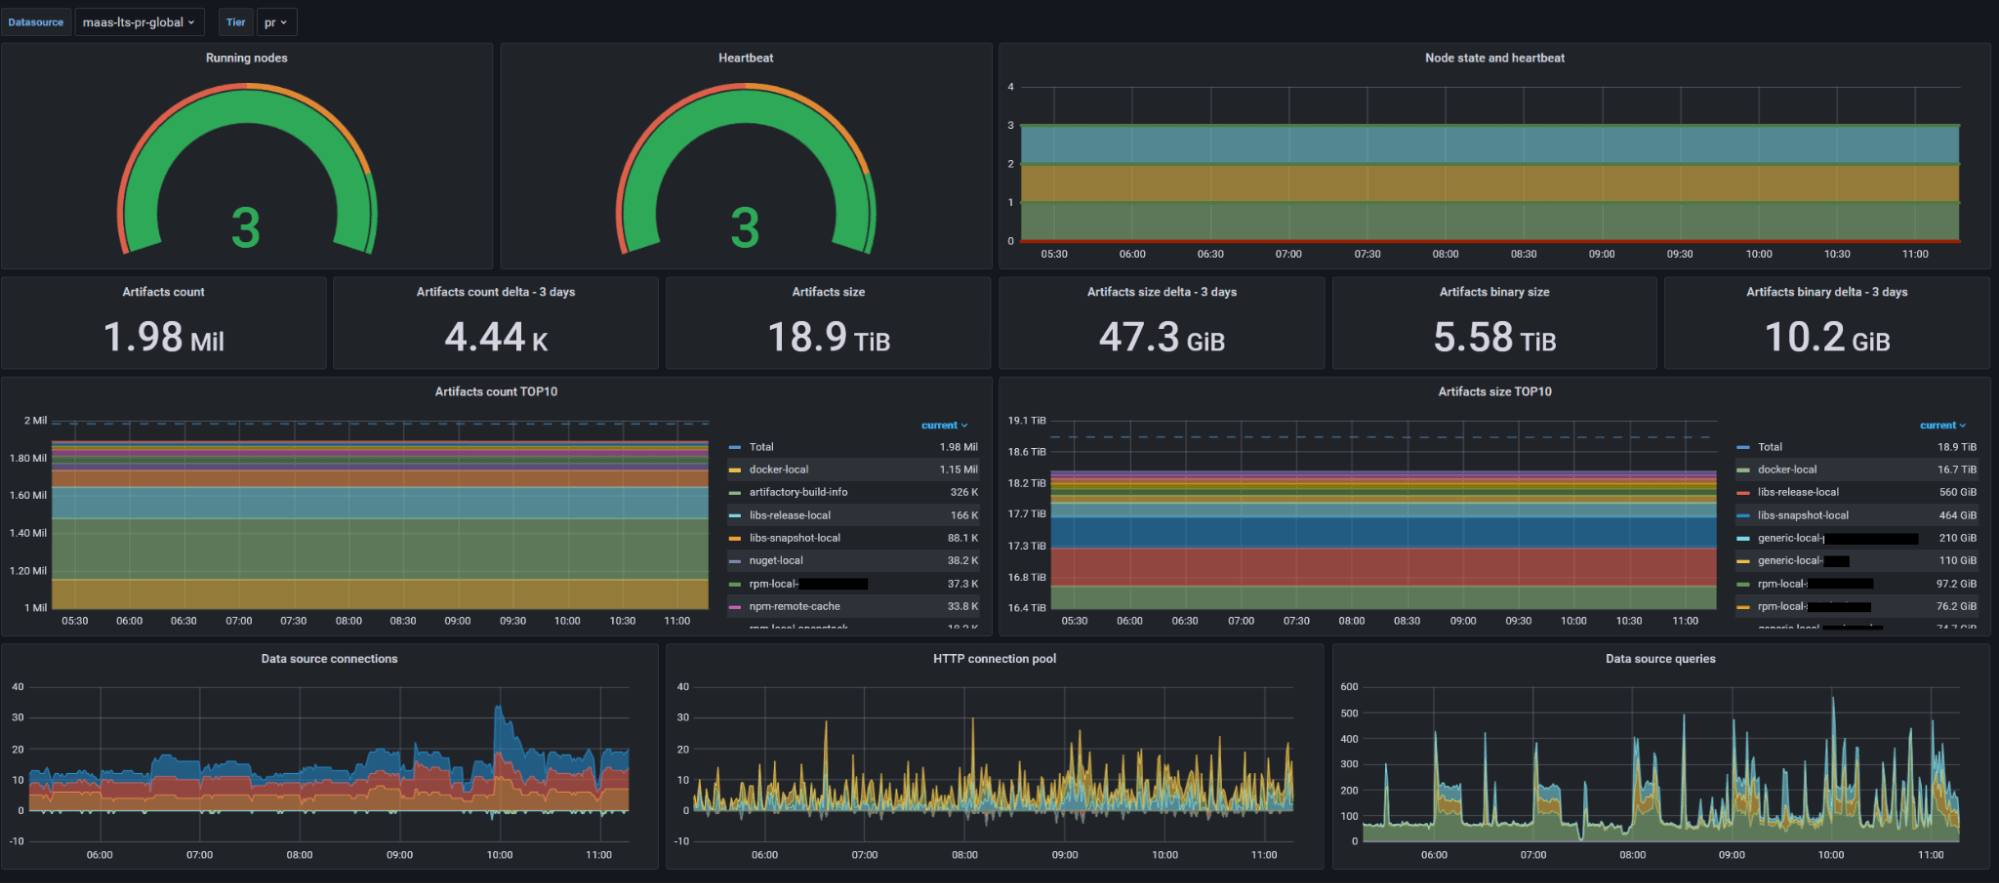 *Adform uses Grafana dashboards like this to analyze the health of its system.*